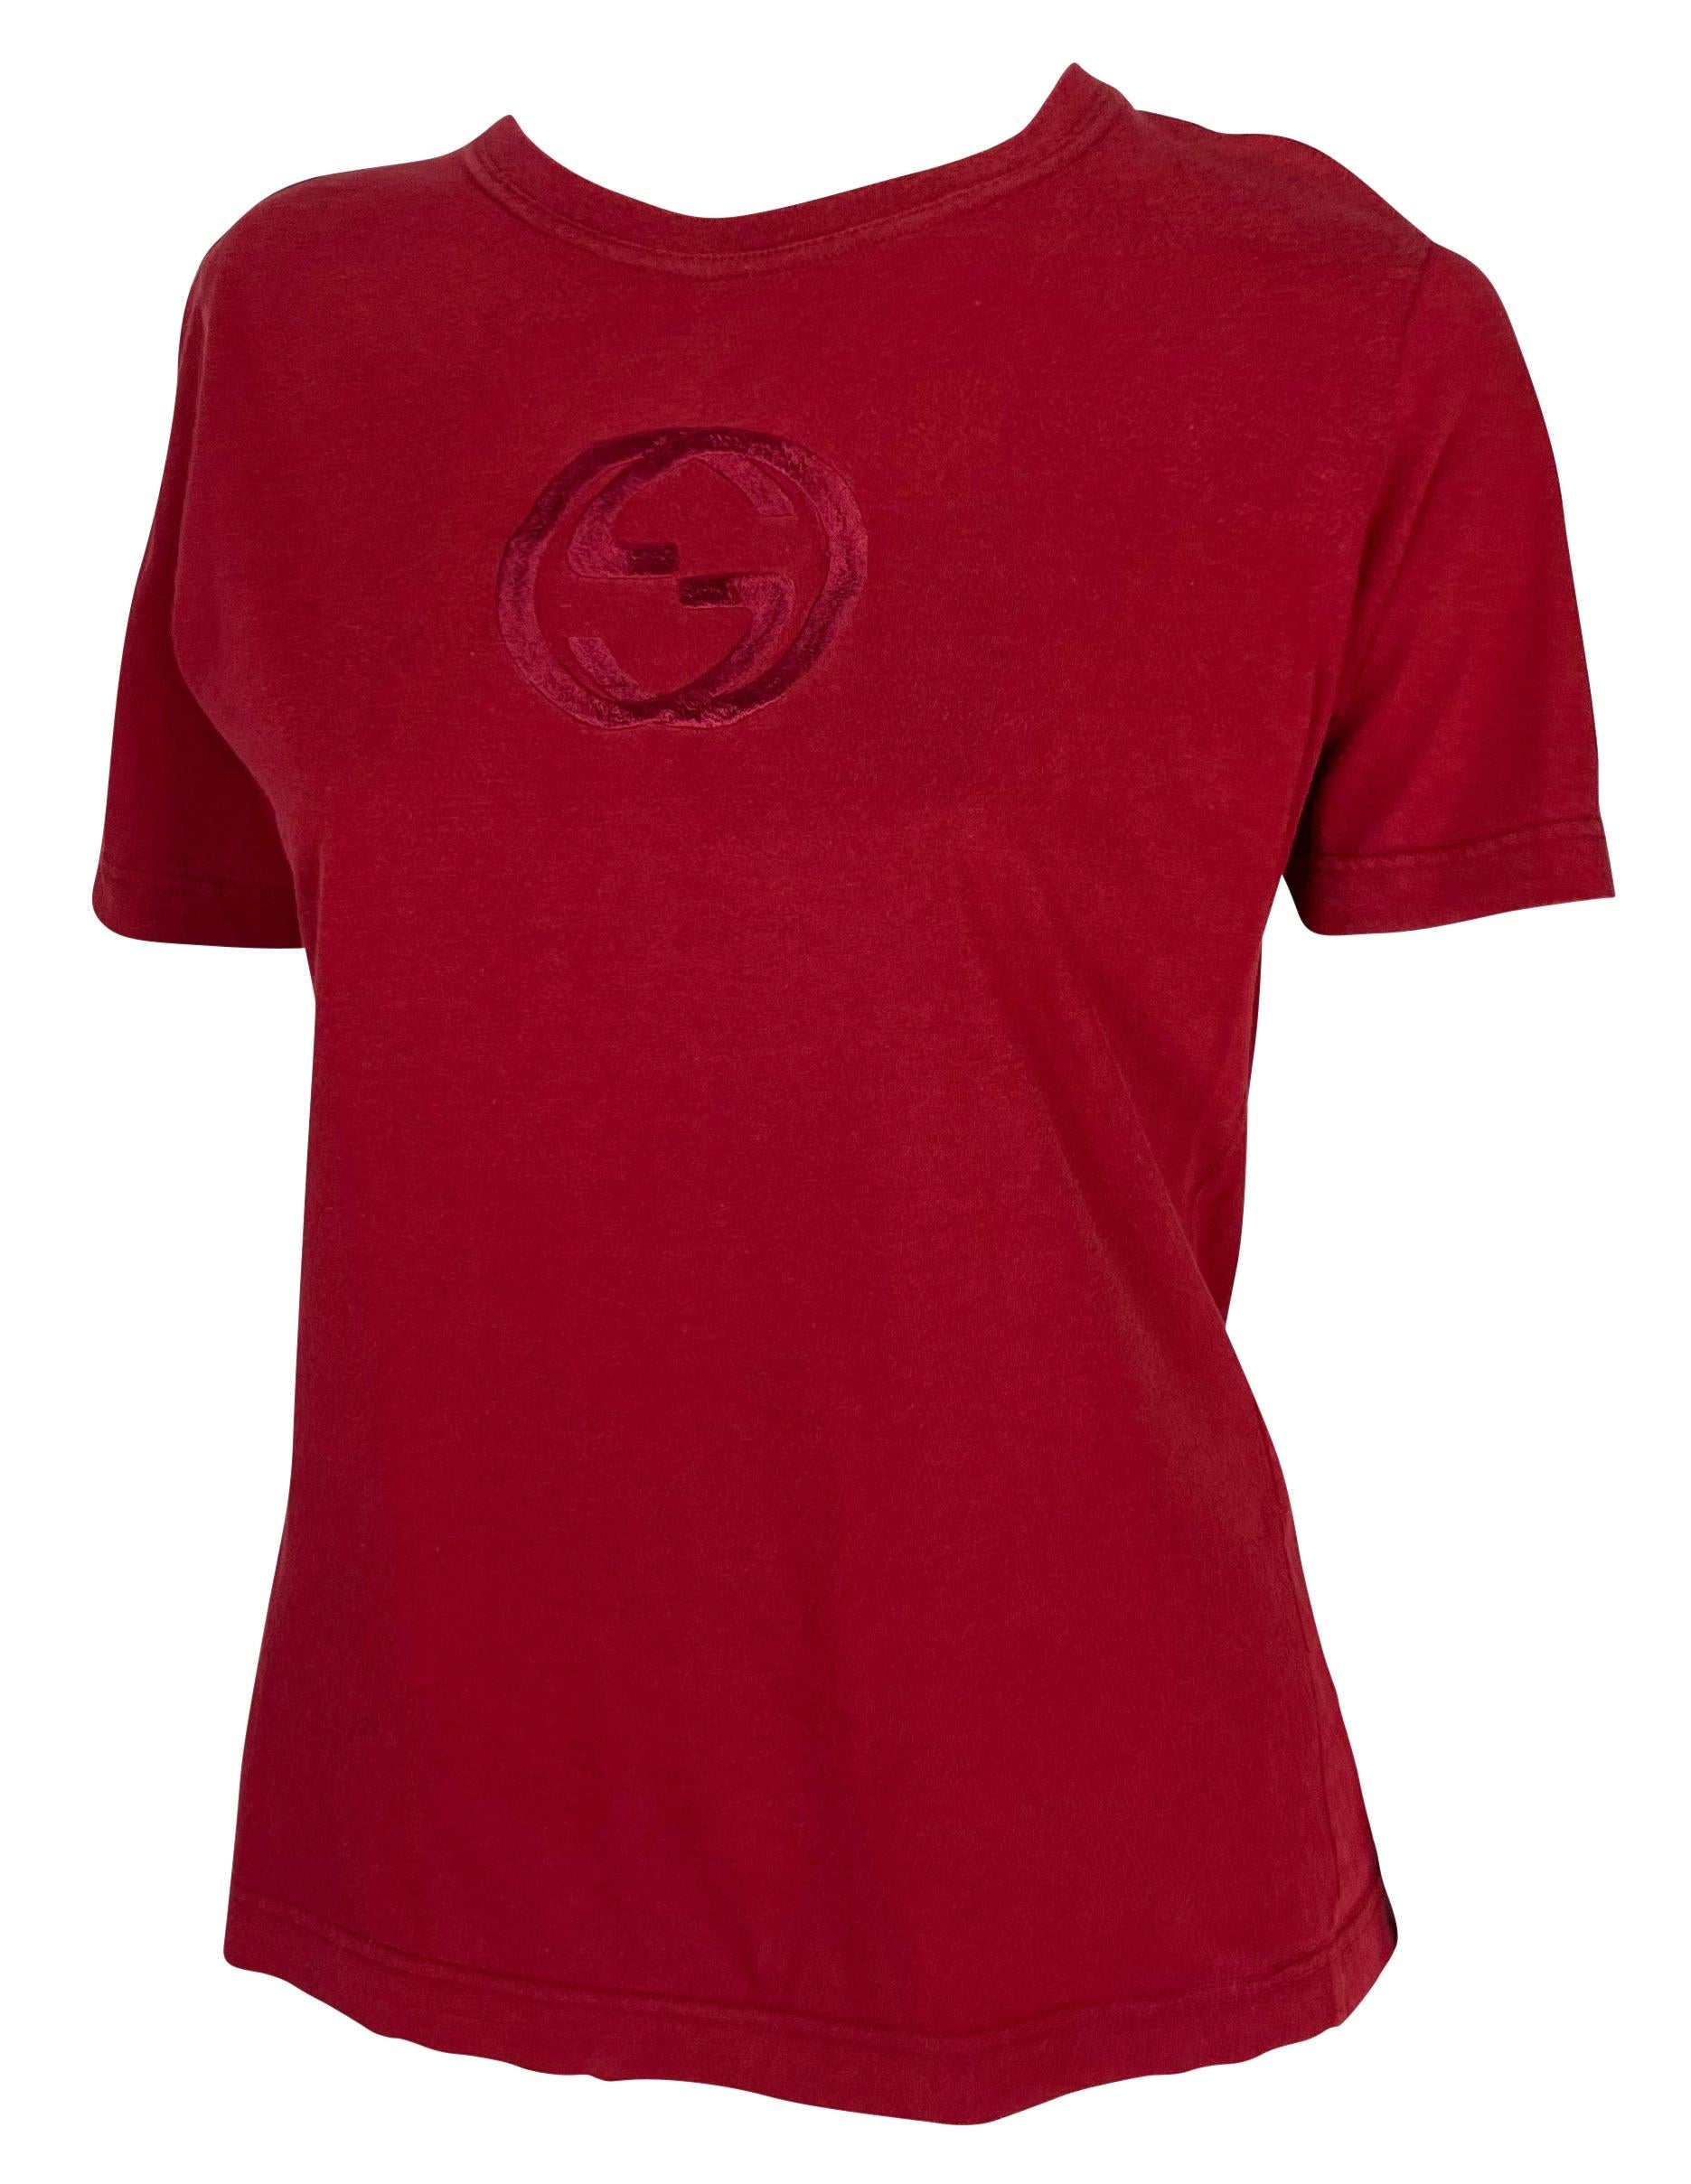 Presenting a red branded Gucci t-shirt, designed by Tom Ford. From the Spring/Summer 1997 collection, this classic crewneck t-shirt is perfectly elevated with a large embossed Gucci 'GG' logo at the chest. This unisex t-shirt has the perfect Gucci